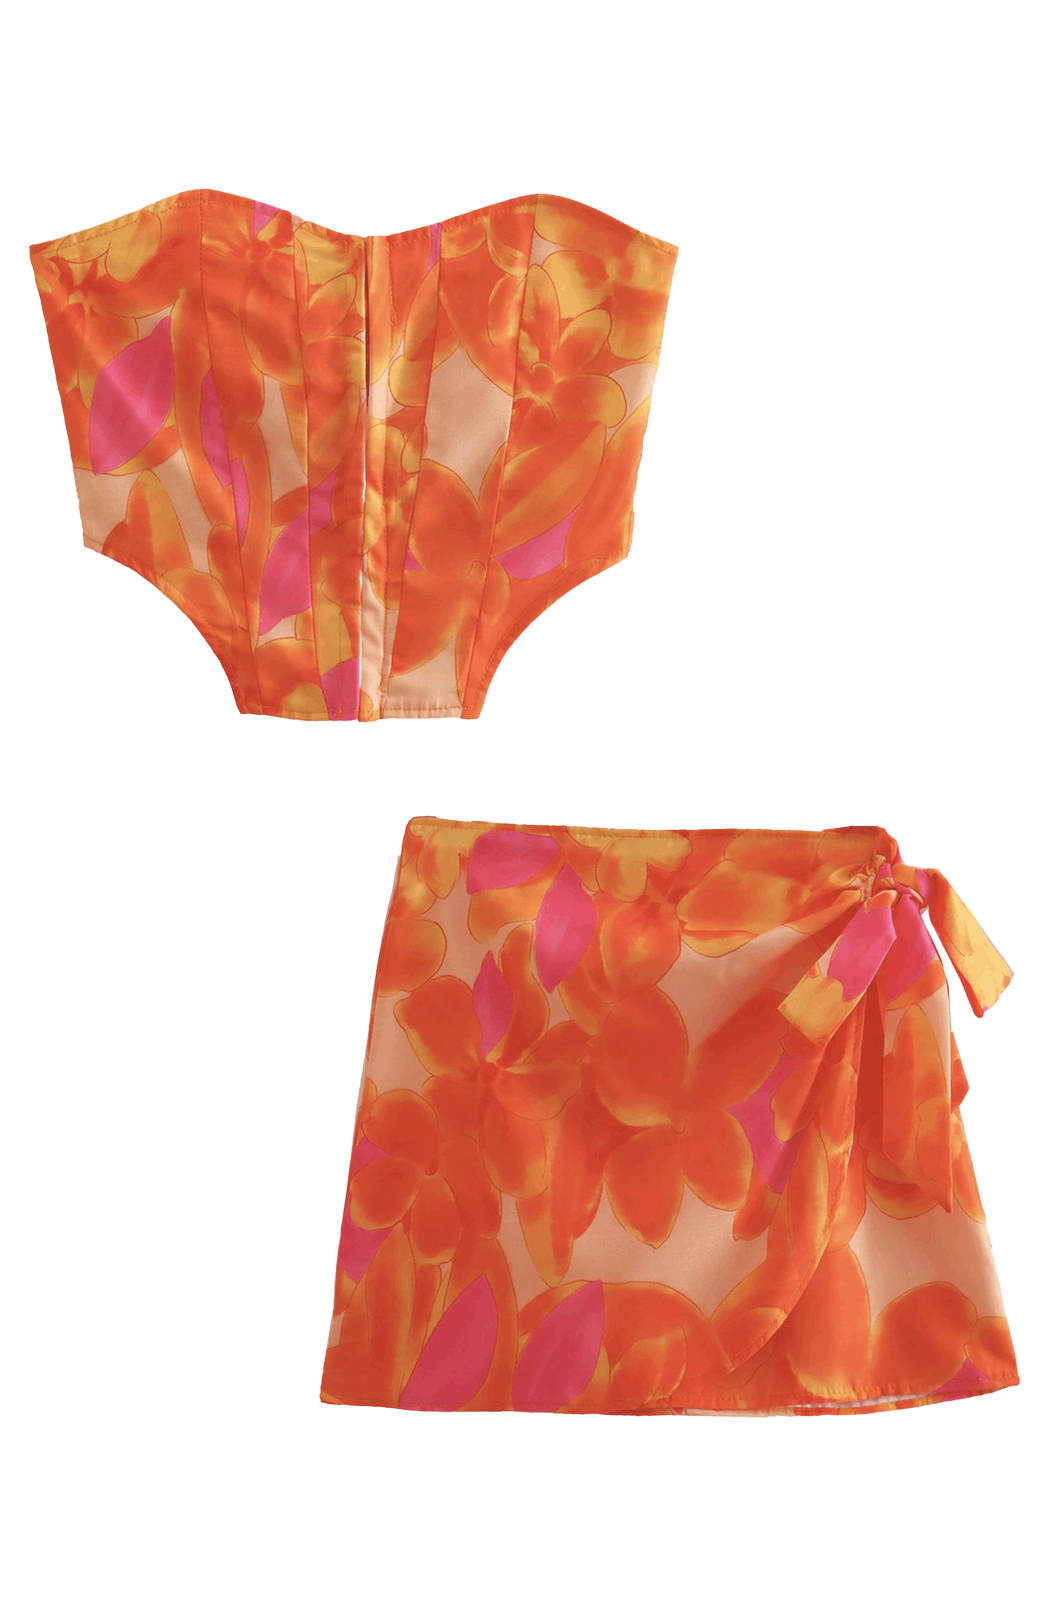 Floral sunset tie dye top and skirt set